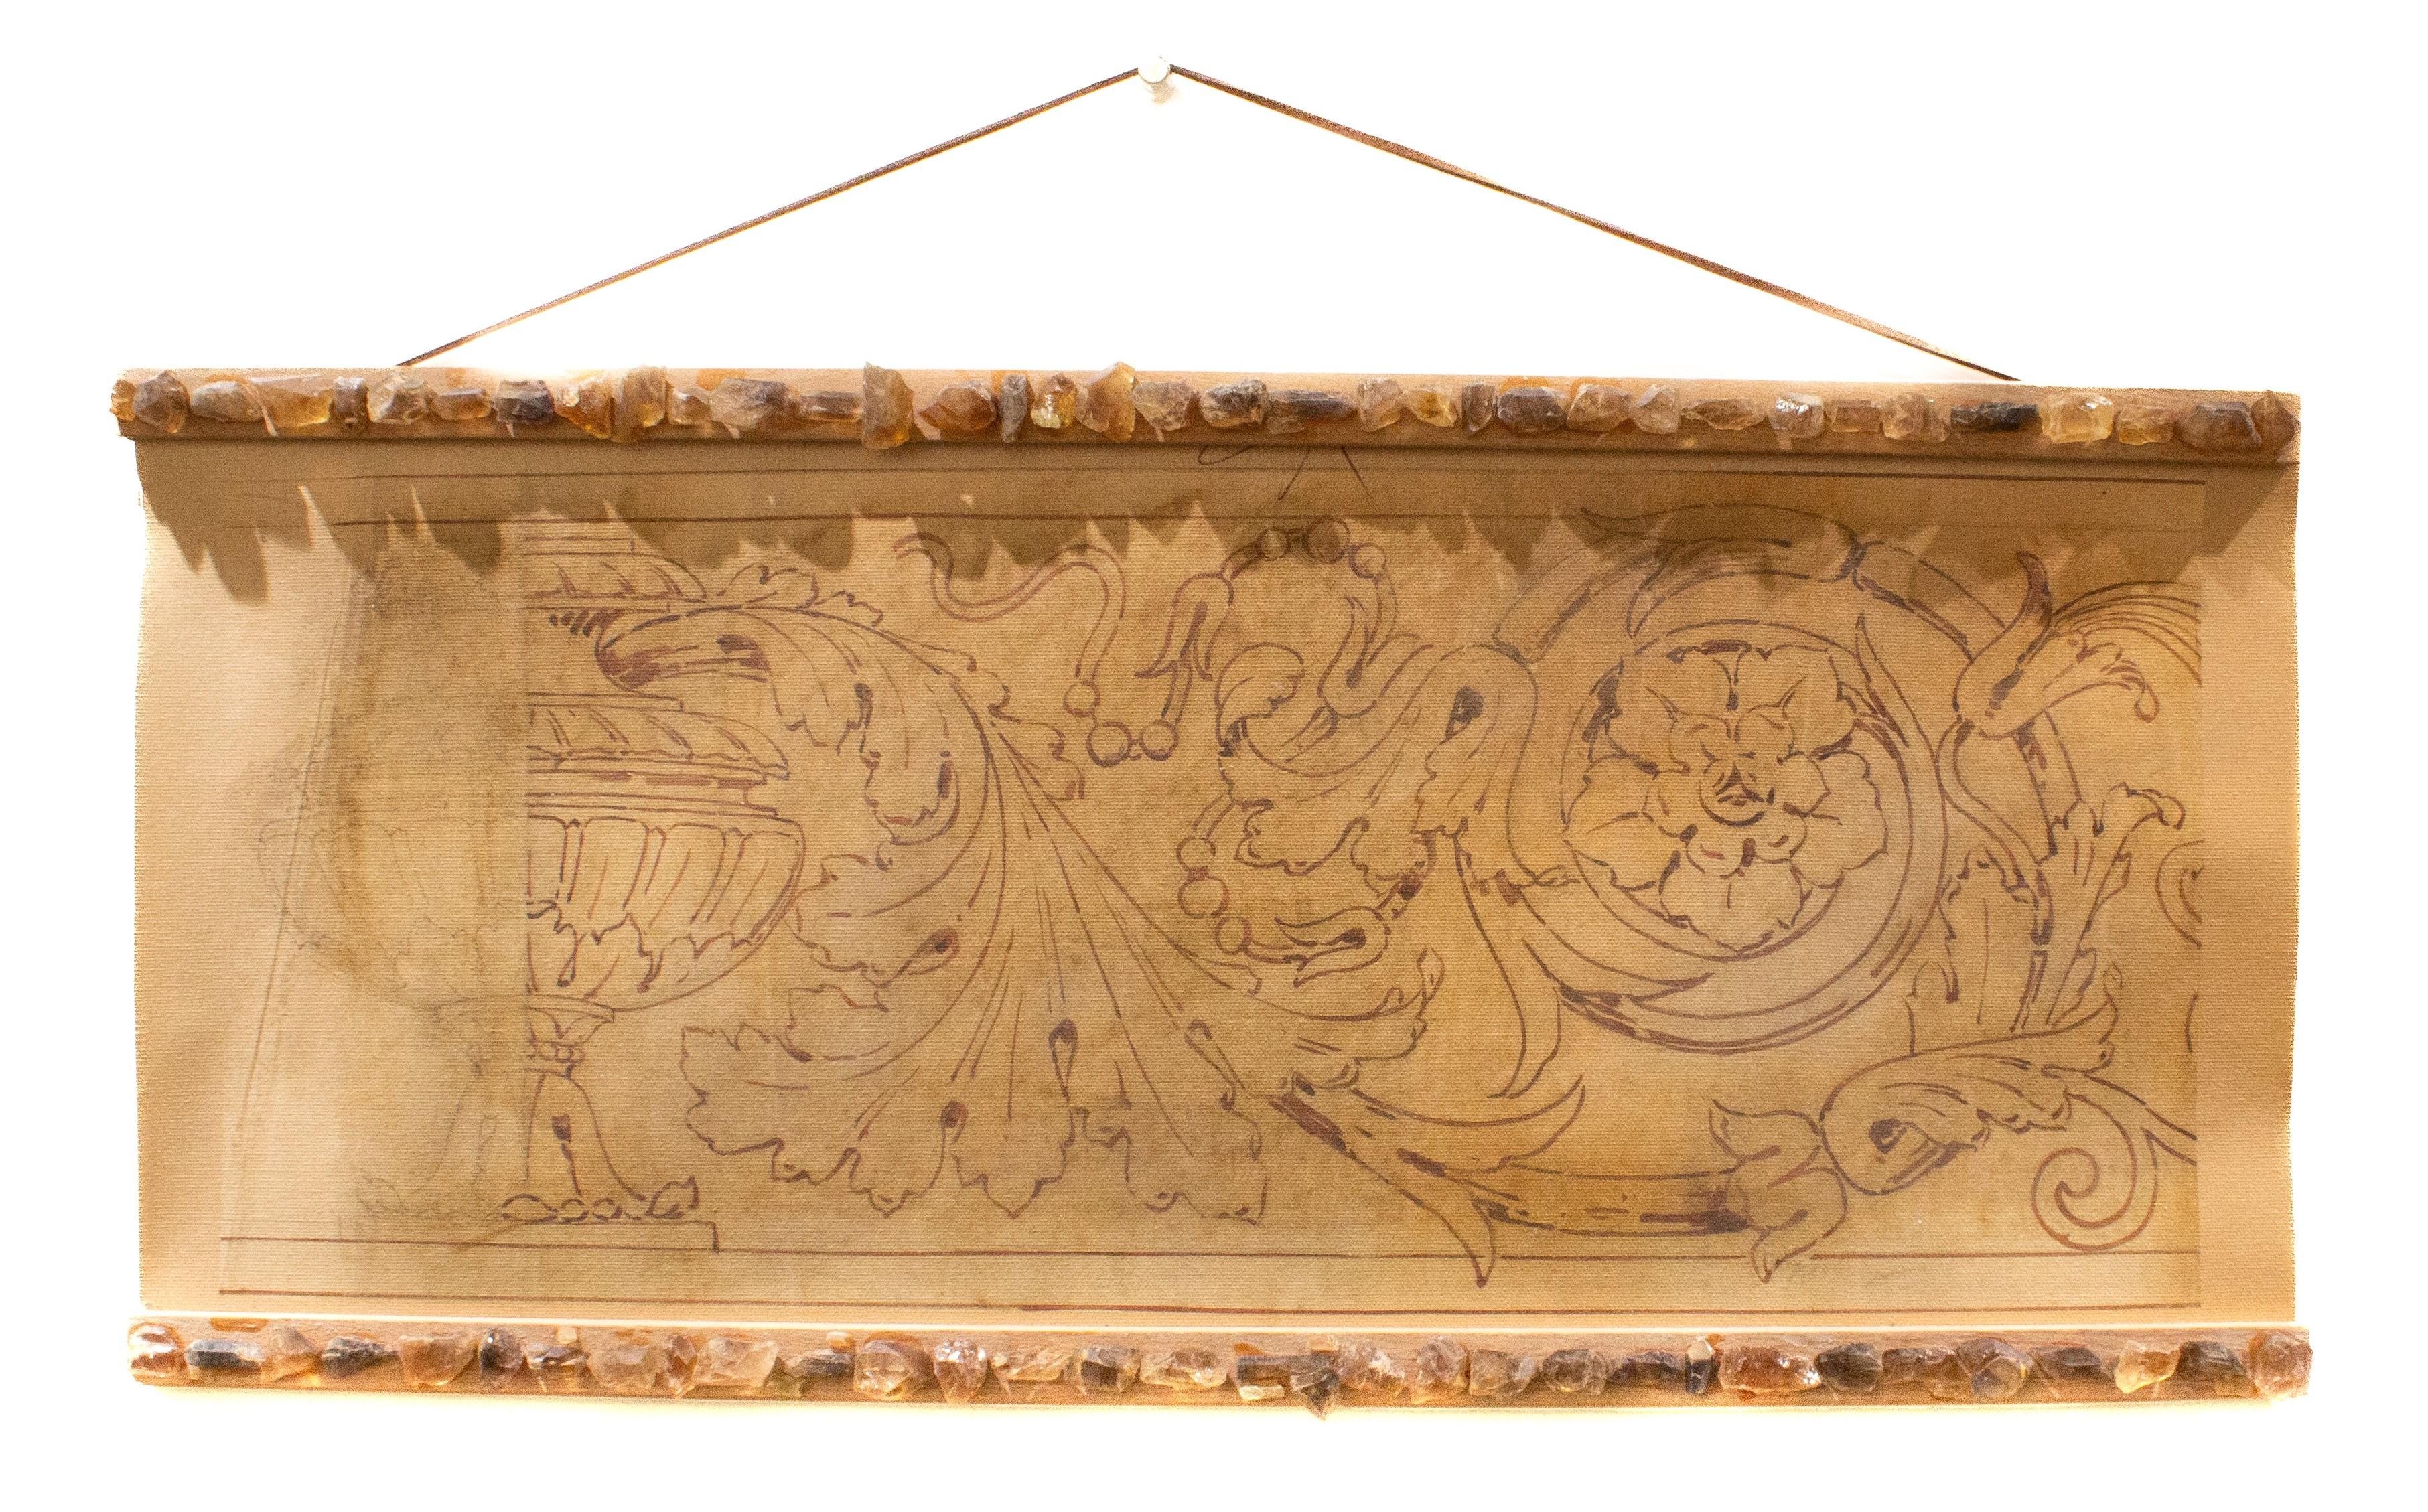 18th century Italian spolvero fresco pattern printed onto canvas and framed with a custom frame and citrine crystals.

Spolvero is an artistic method of transferring a design from a print to the prepared surface of a canvas, panel, or wall. Holes